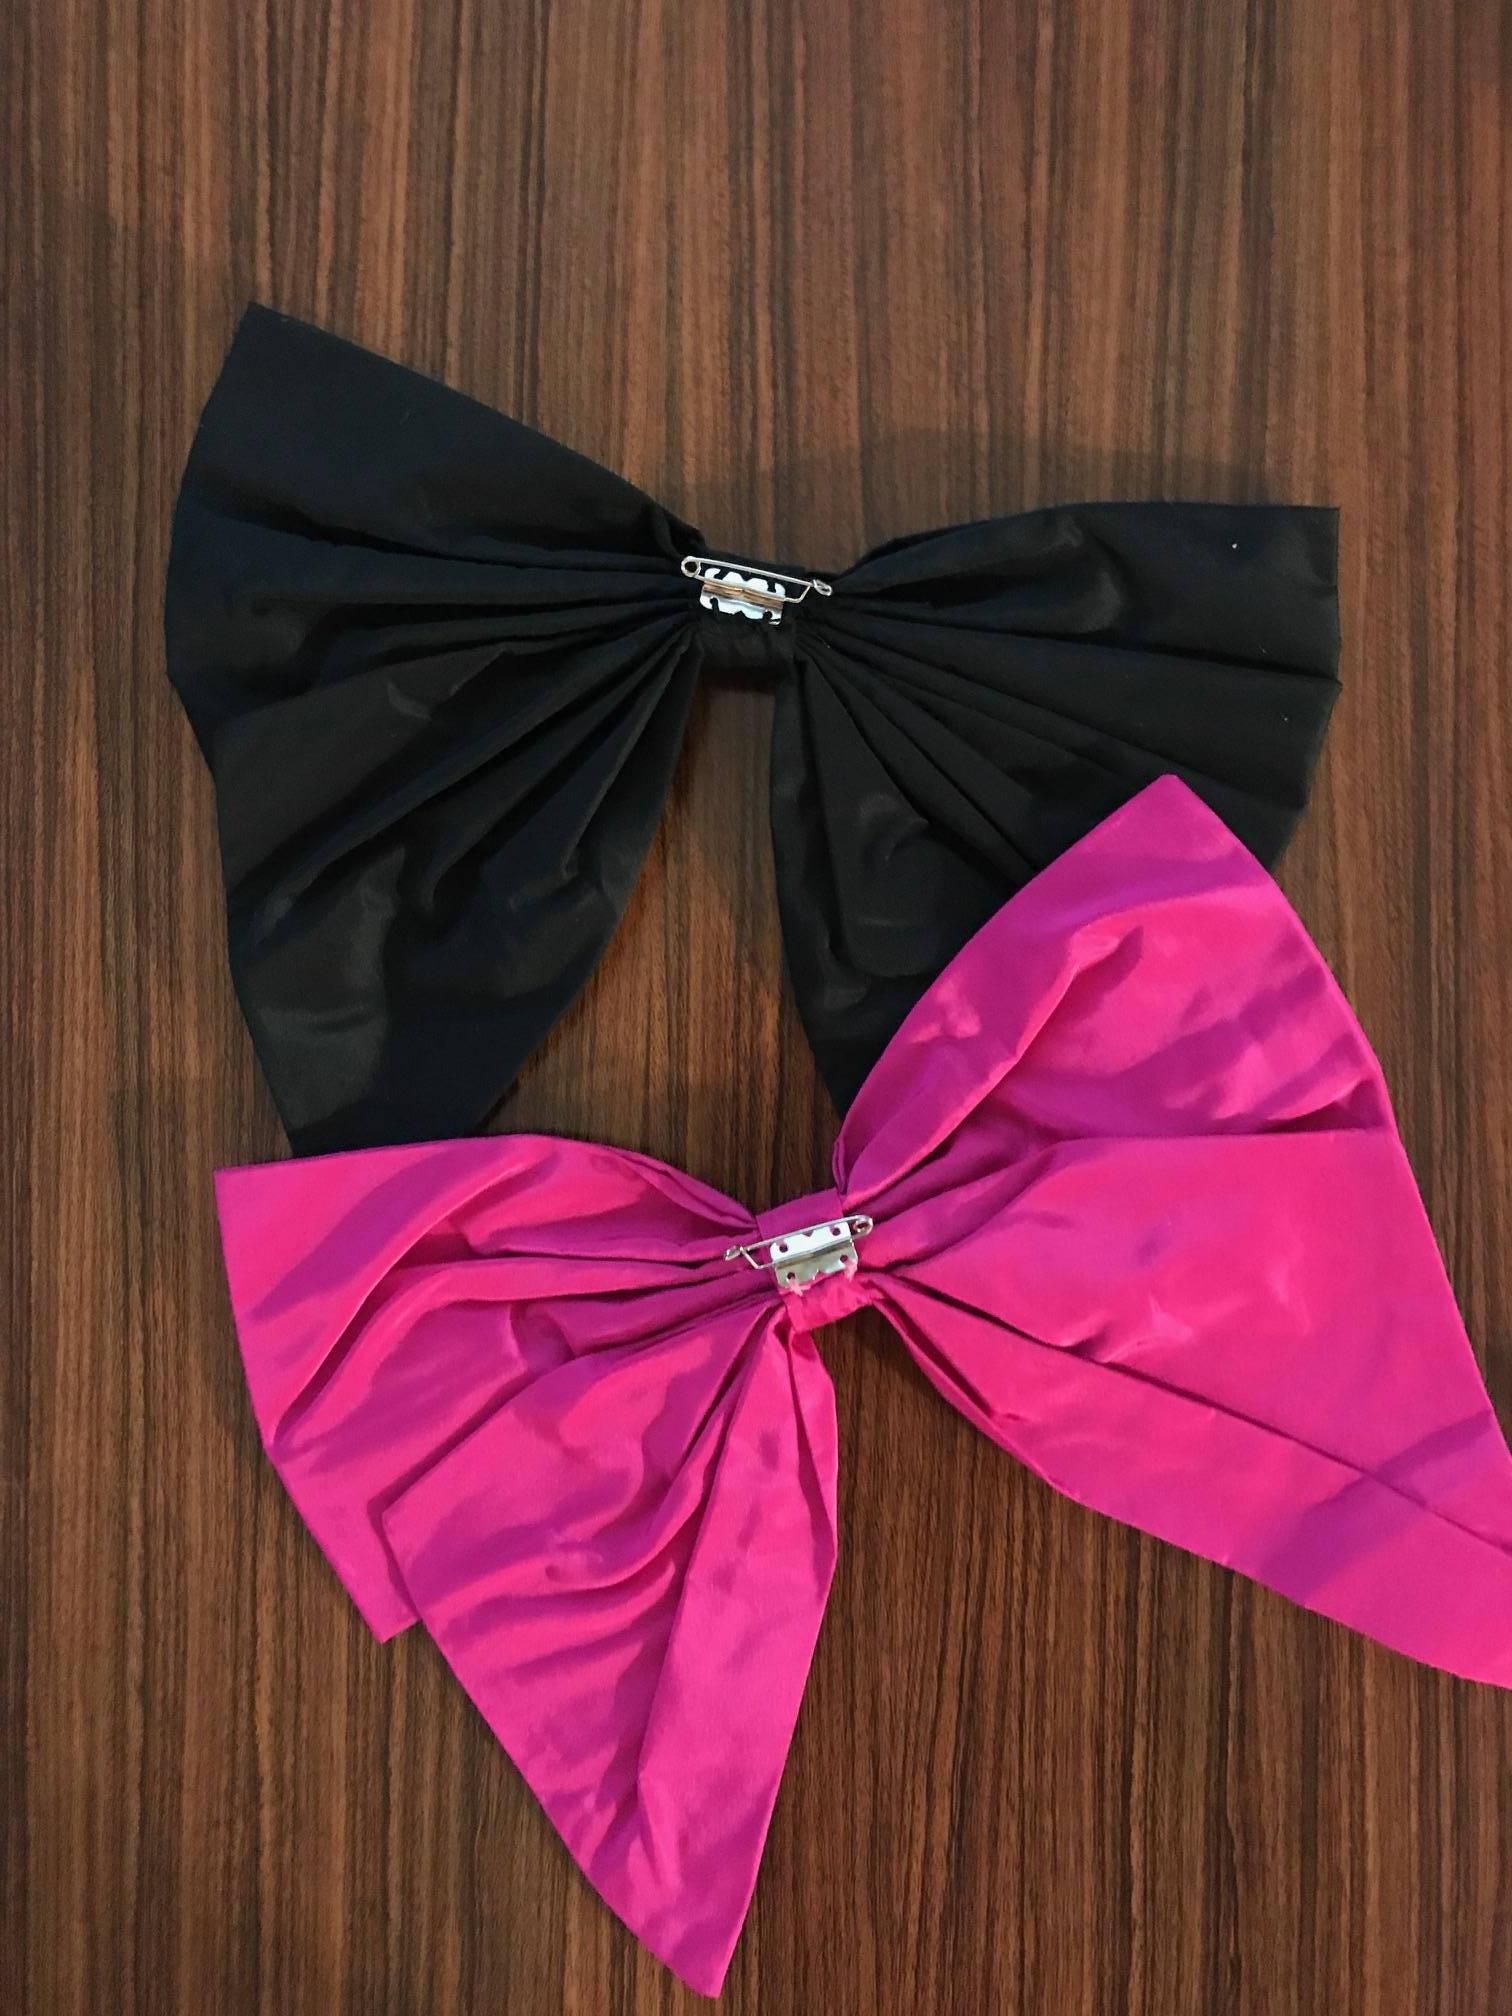 Set of six vintage 1980's Patrick Kelly giant cloth bow brooches in pink and black. Pin just one on a sweater, add one to each shoulder strap of an evening gown, or adorn a cocktail dress with all 6 for real Patrick Kelly flair!

Measure